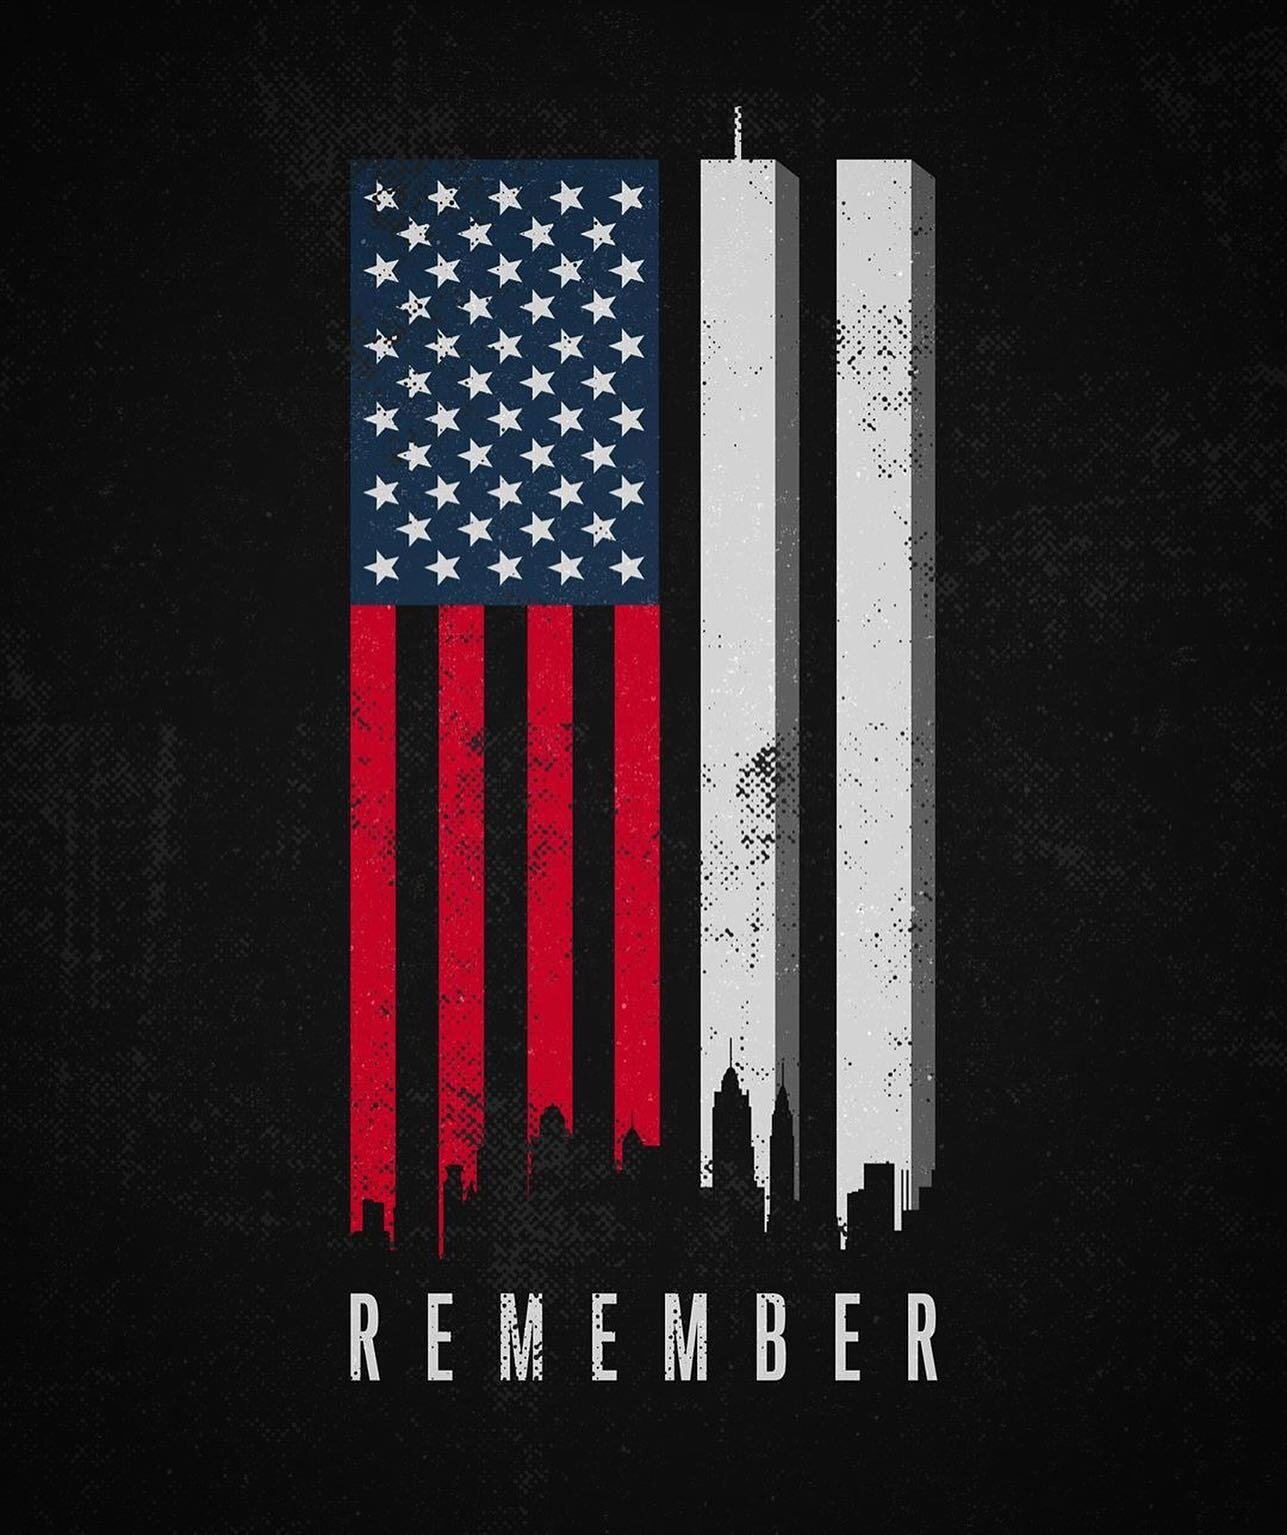 We will never forget. 
Thank you to all who sacrificed and to all who proudly serve our communities today. 
#America